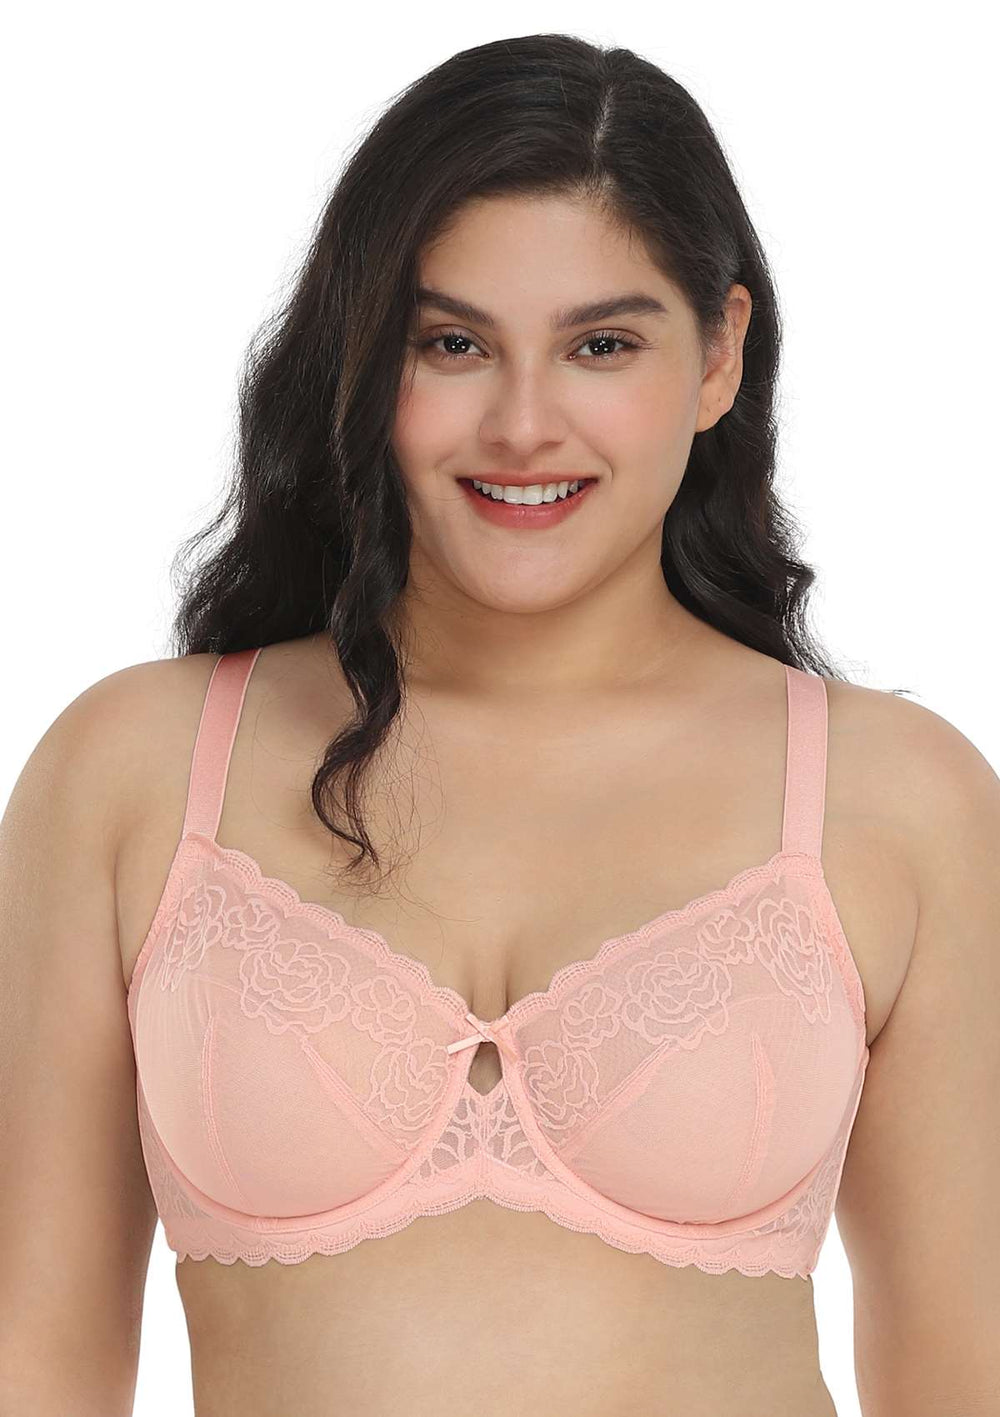 HSIA Rosa Bonica Sheer Lace Mesh Unlined Thin Comfy Woman Bra